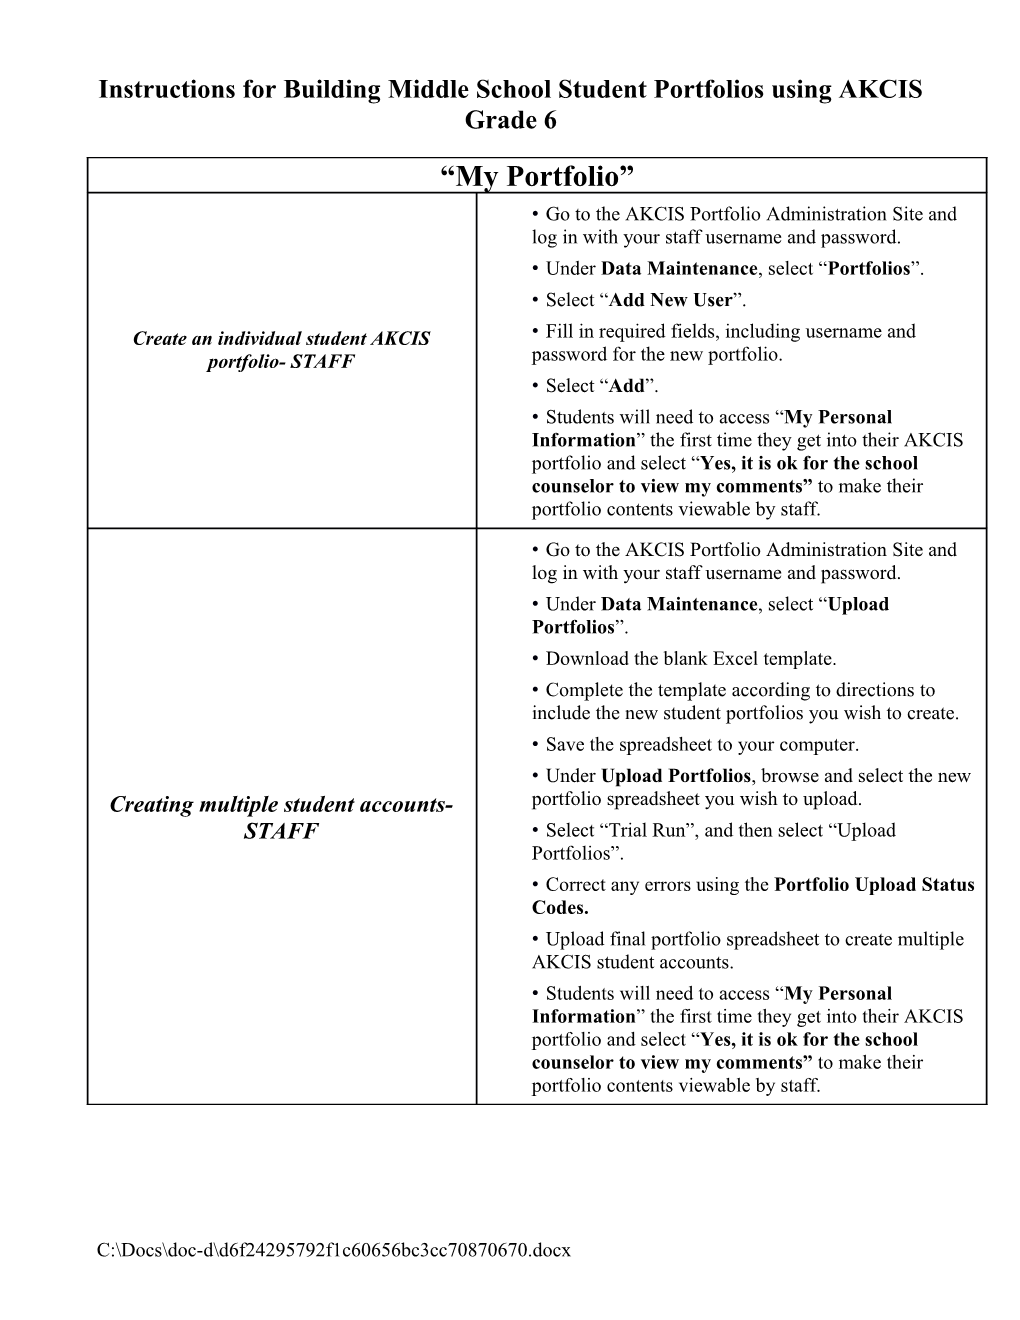 Instructions for Building Middle School Student Portfolios Using AKCIS